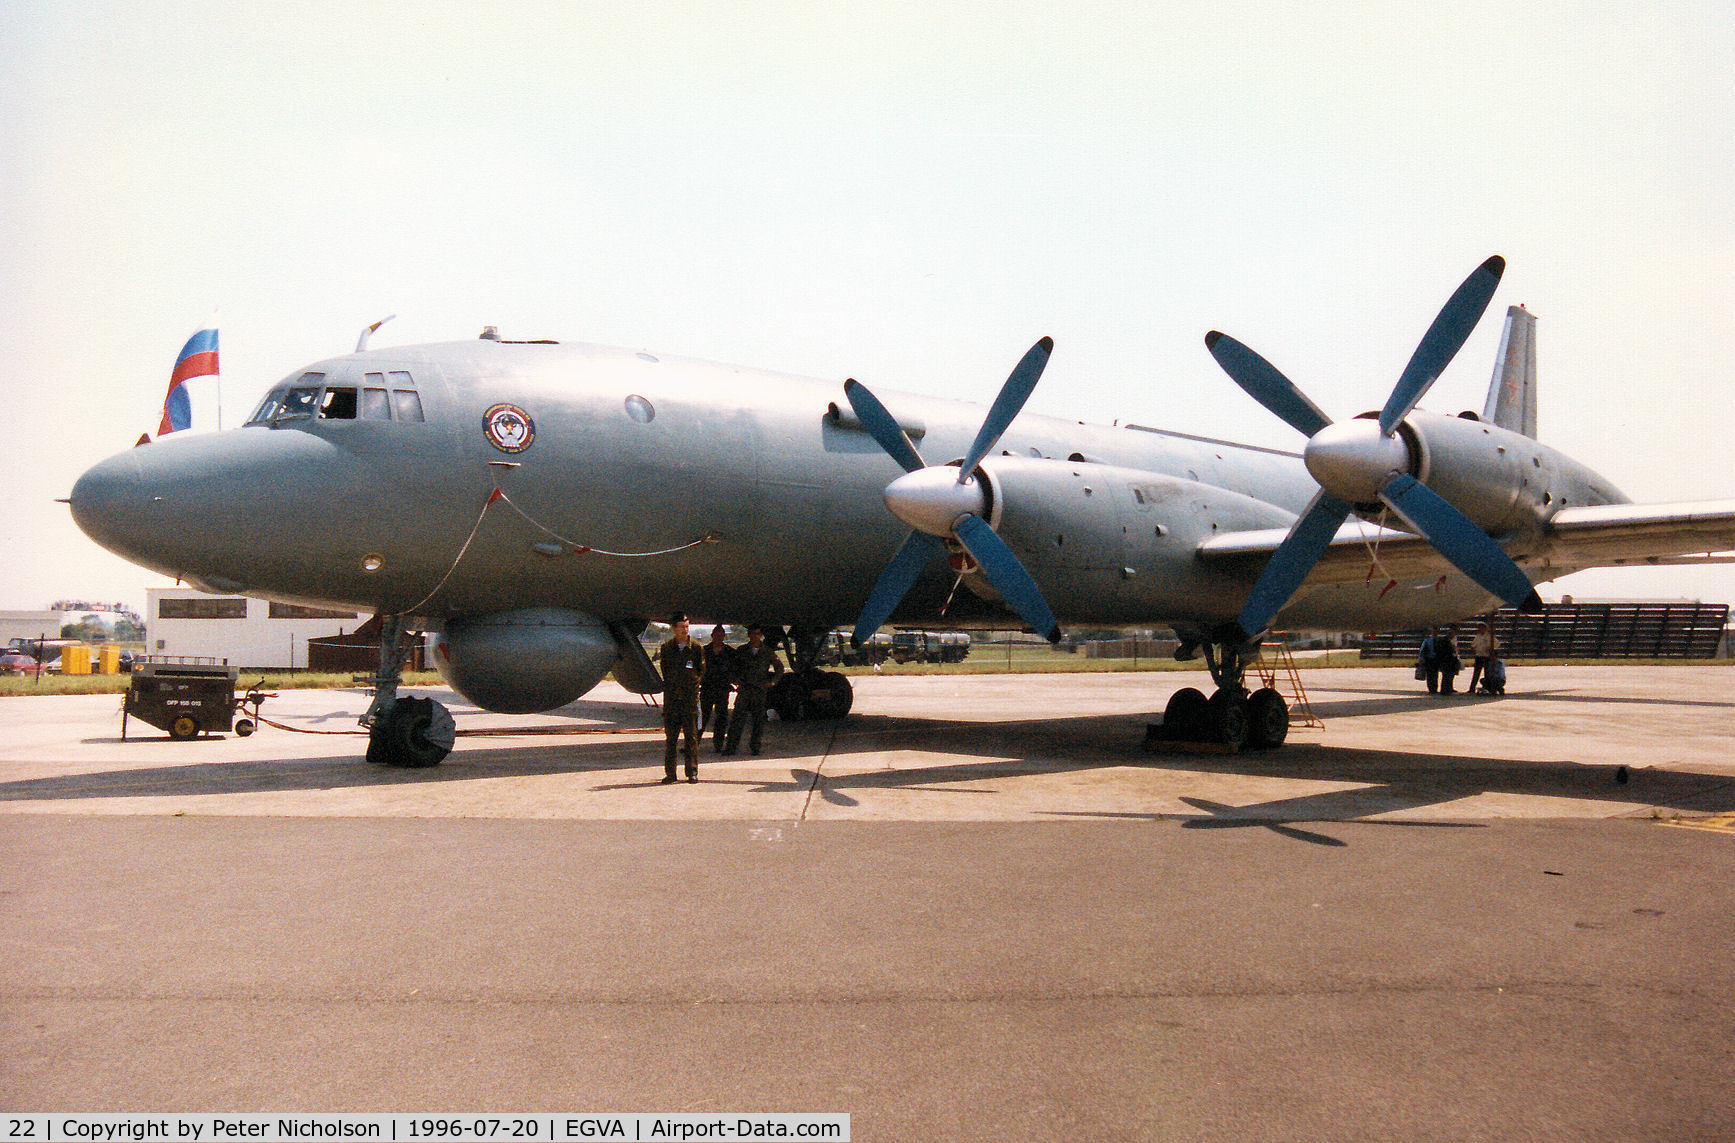 22, Ilyushin Il-38 C/N 11006, Another view of the Il-38 May of the Russian Navy's Training Regiment based at Ostrov on display at the 1996 Royal Intnl Air Tattoo at RAF Fairford.